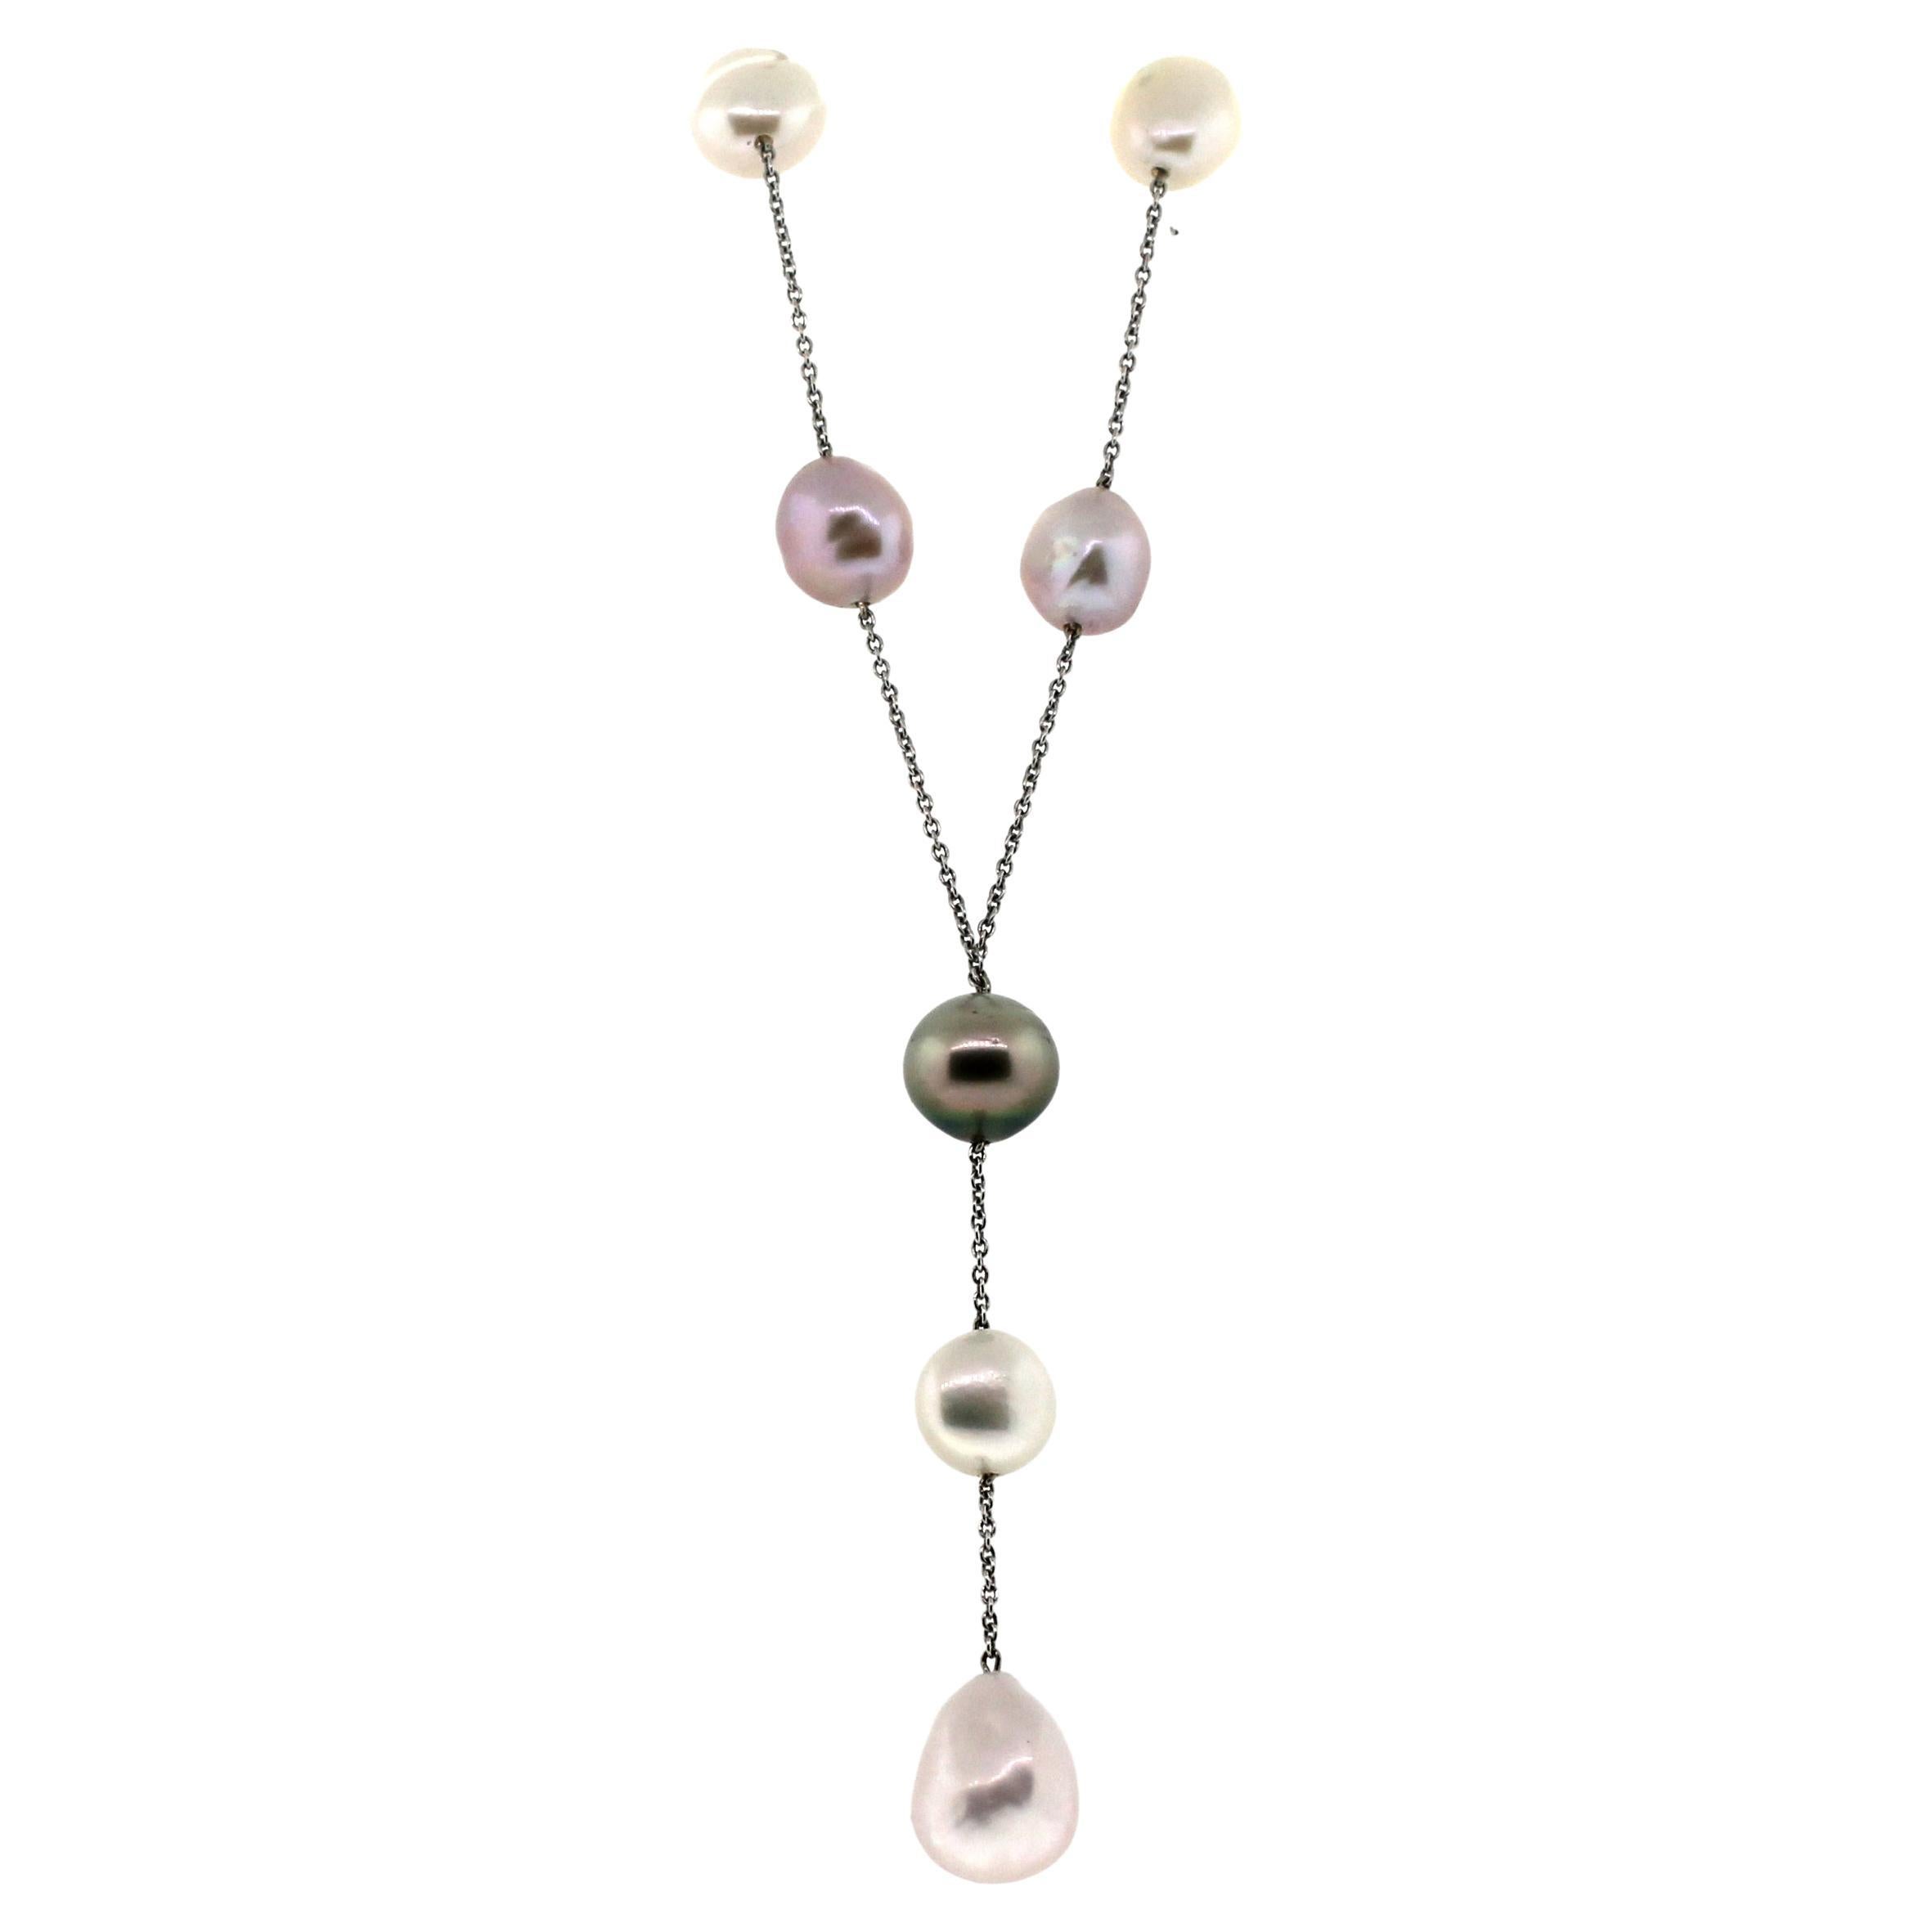 Hakimoto 18K White Gold Chain With Tahiti and 8 Baroque Pearl Necklace